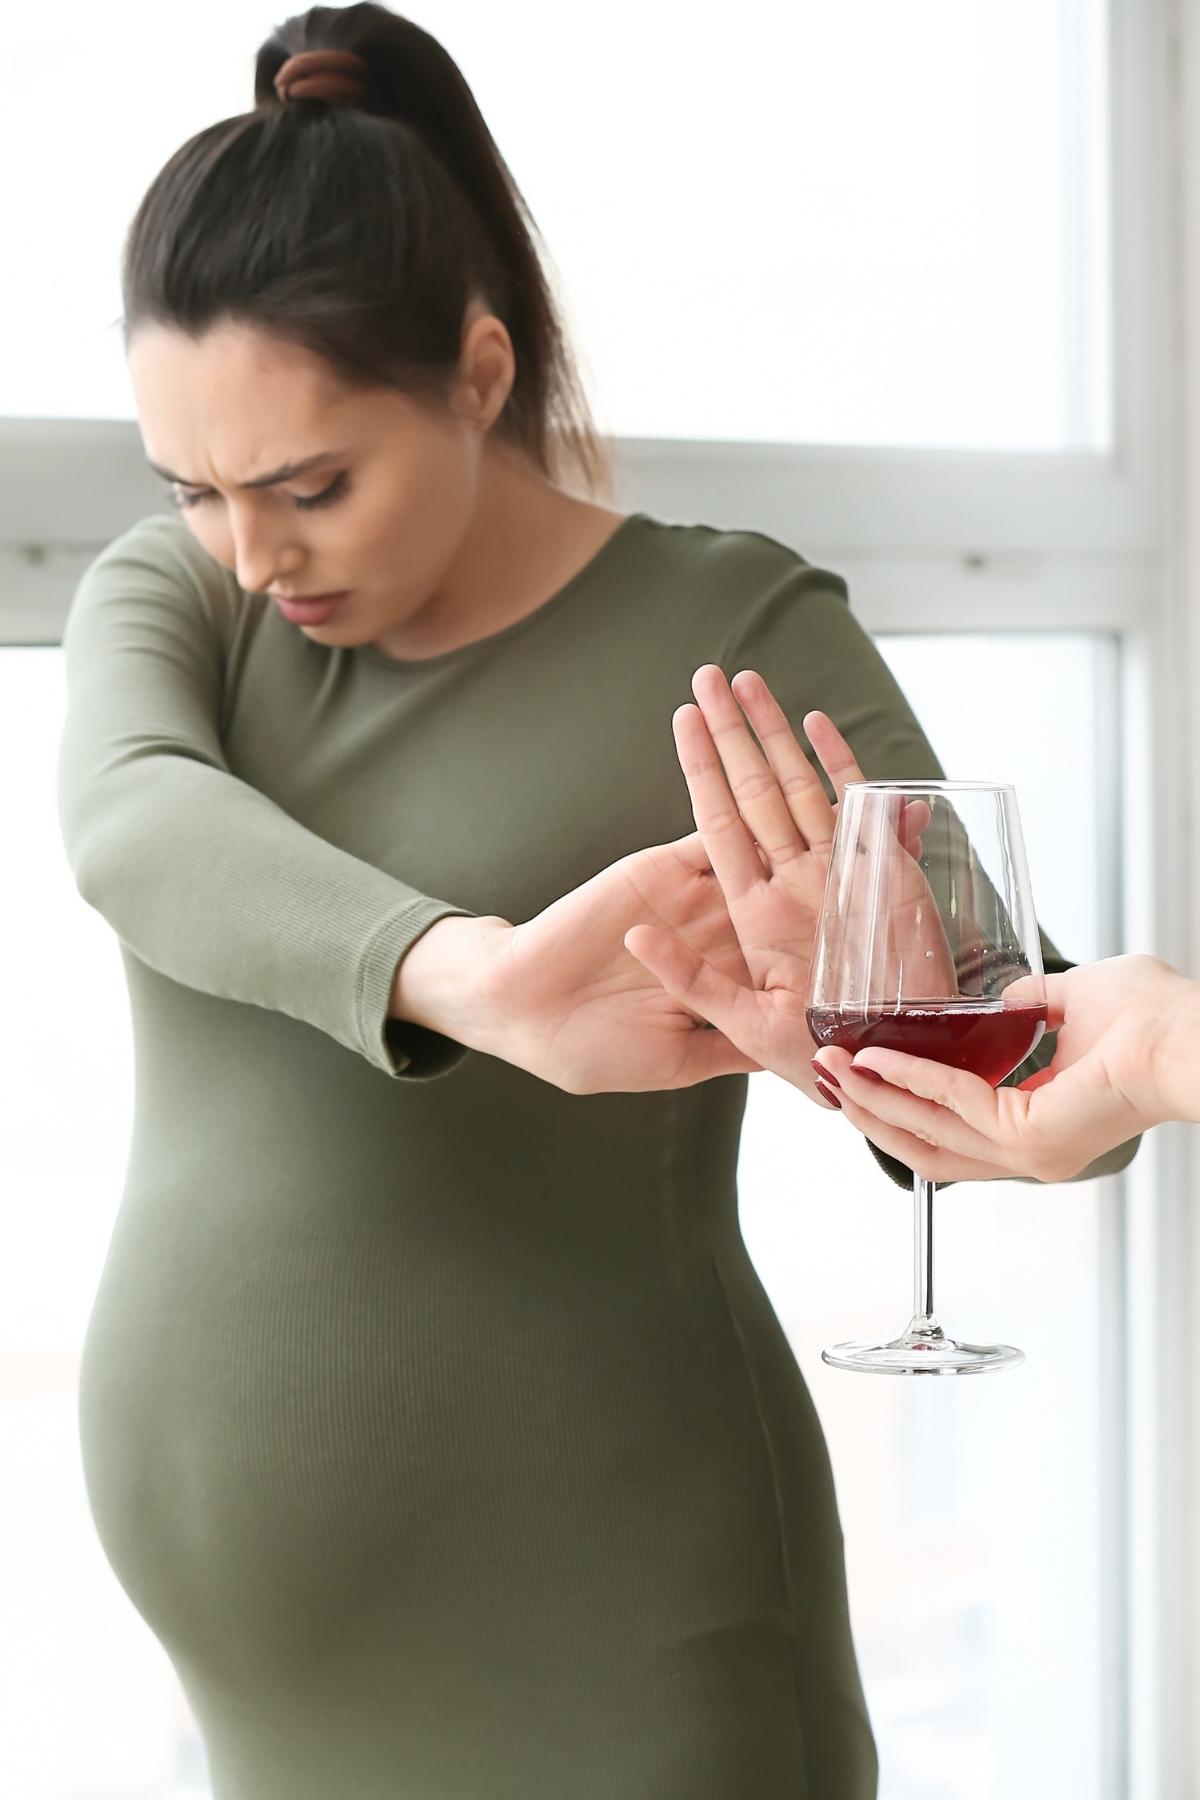 pregnant person in a green top with brown hair pushing away a glass of red wine.